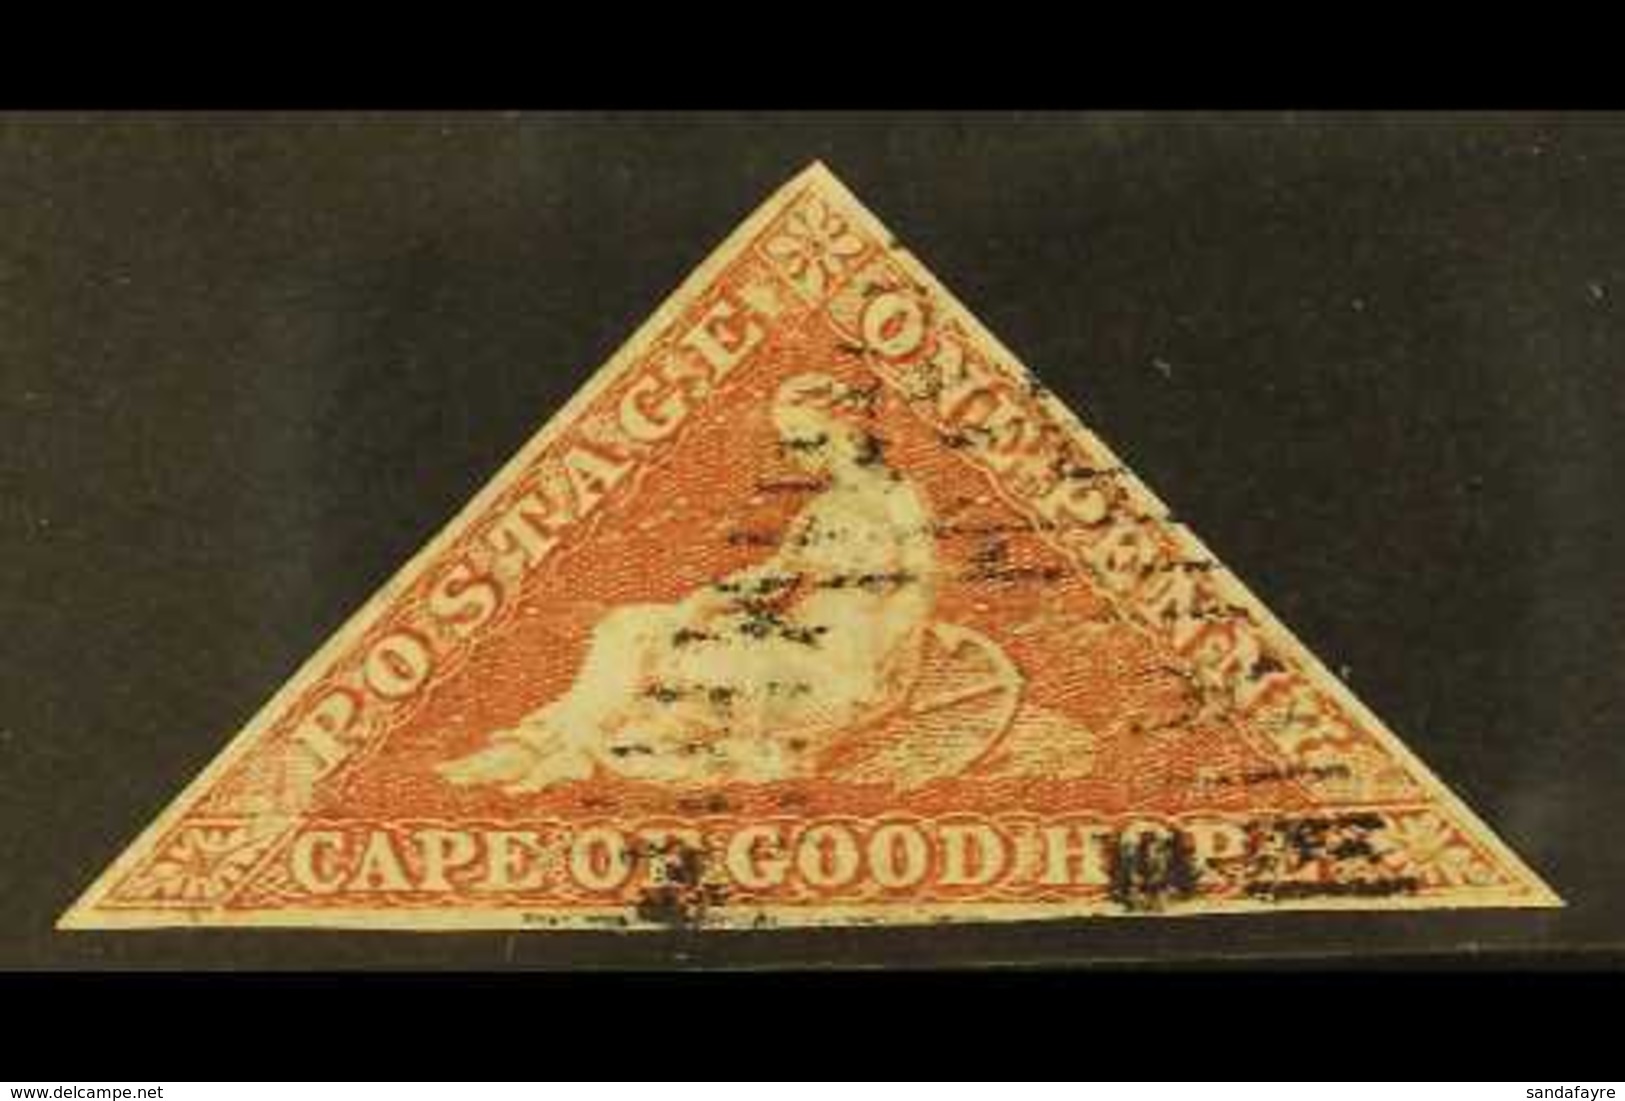 CAPE OF GOOD HOPE 1853 1d Pale Brick Red On Deeply Blued Paper, SG 1, Used With 3 Margins, Cat £450. For More Images, Pl - Unclassified